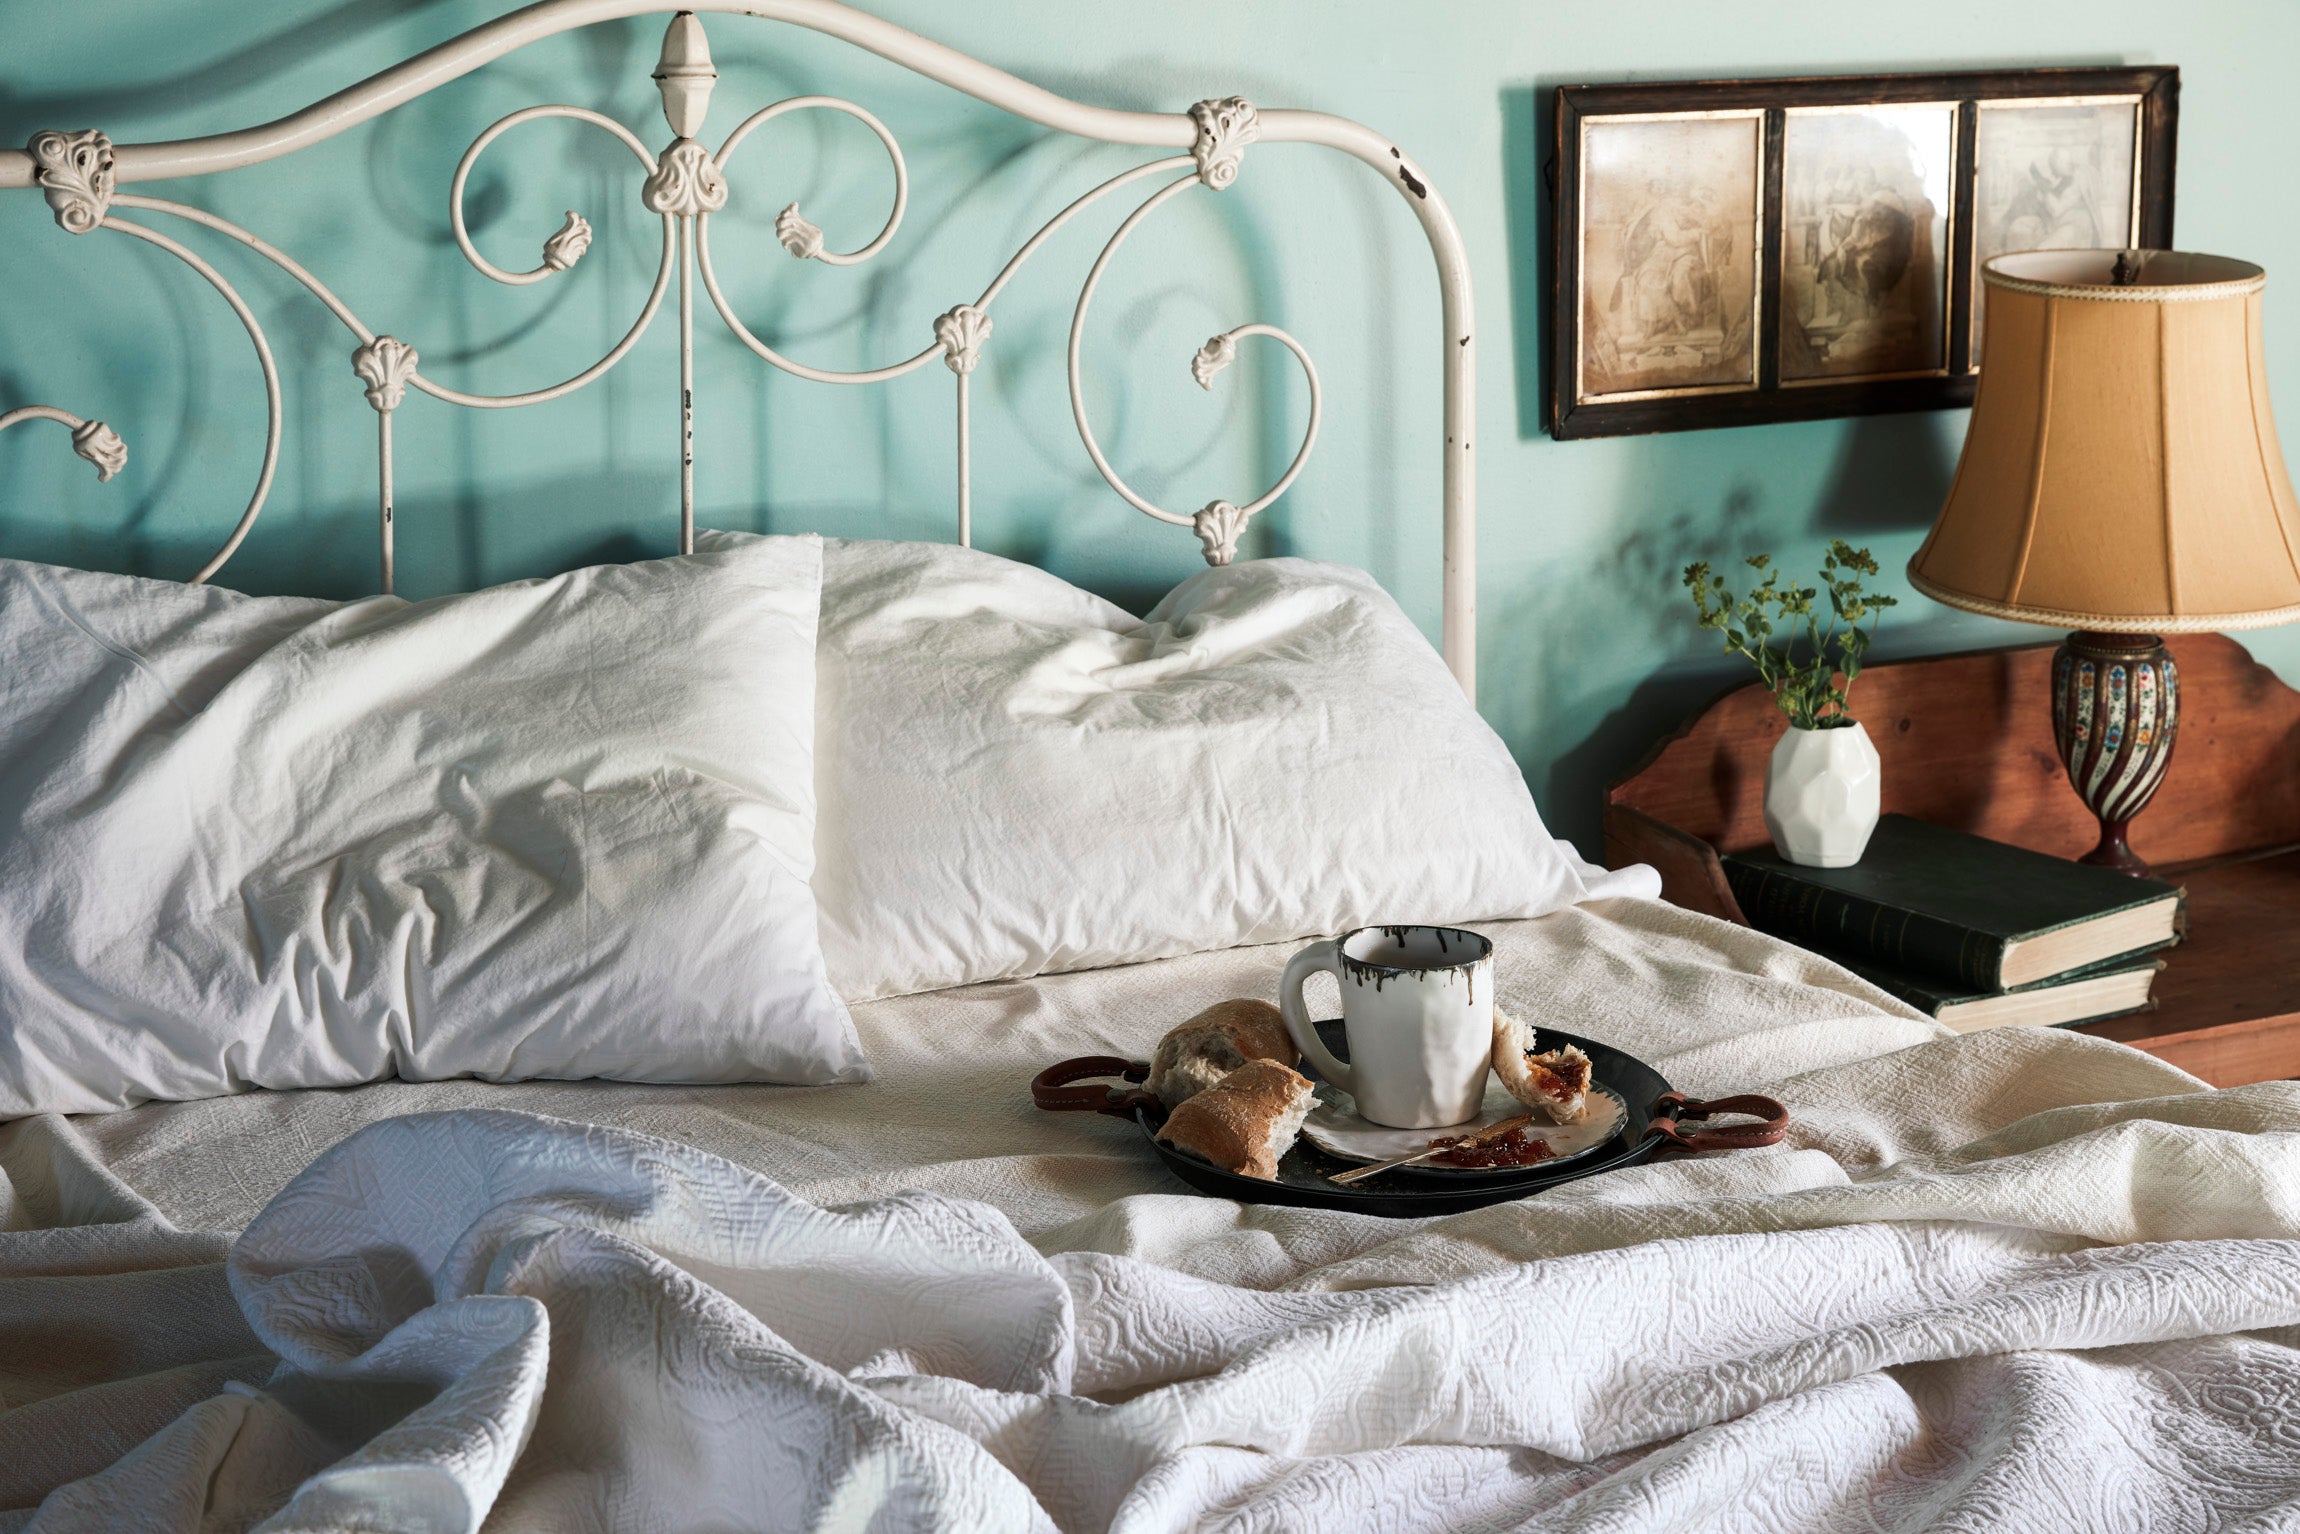 Breakfast in bed.  Cozy vintage bed, with crumpled linens, Remo Tray and Pinch Mug serving coffee and croissants in bed.